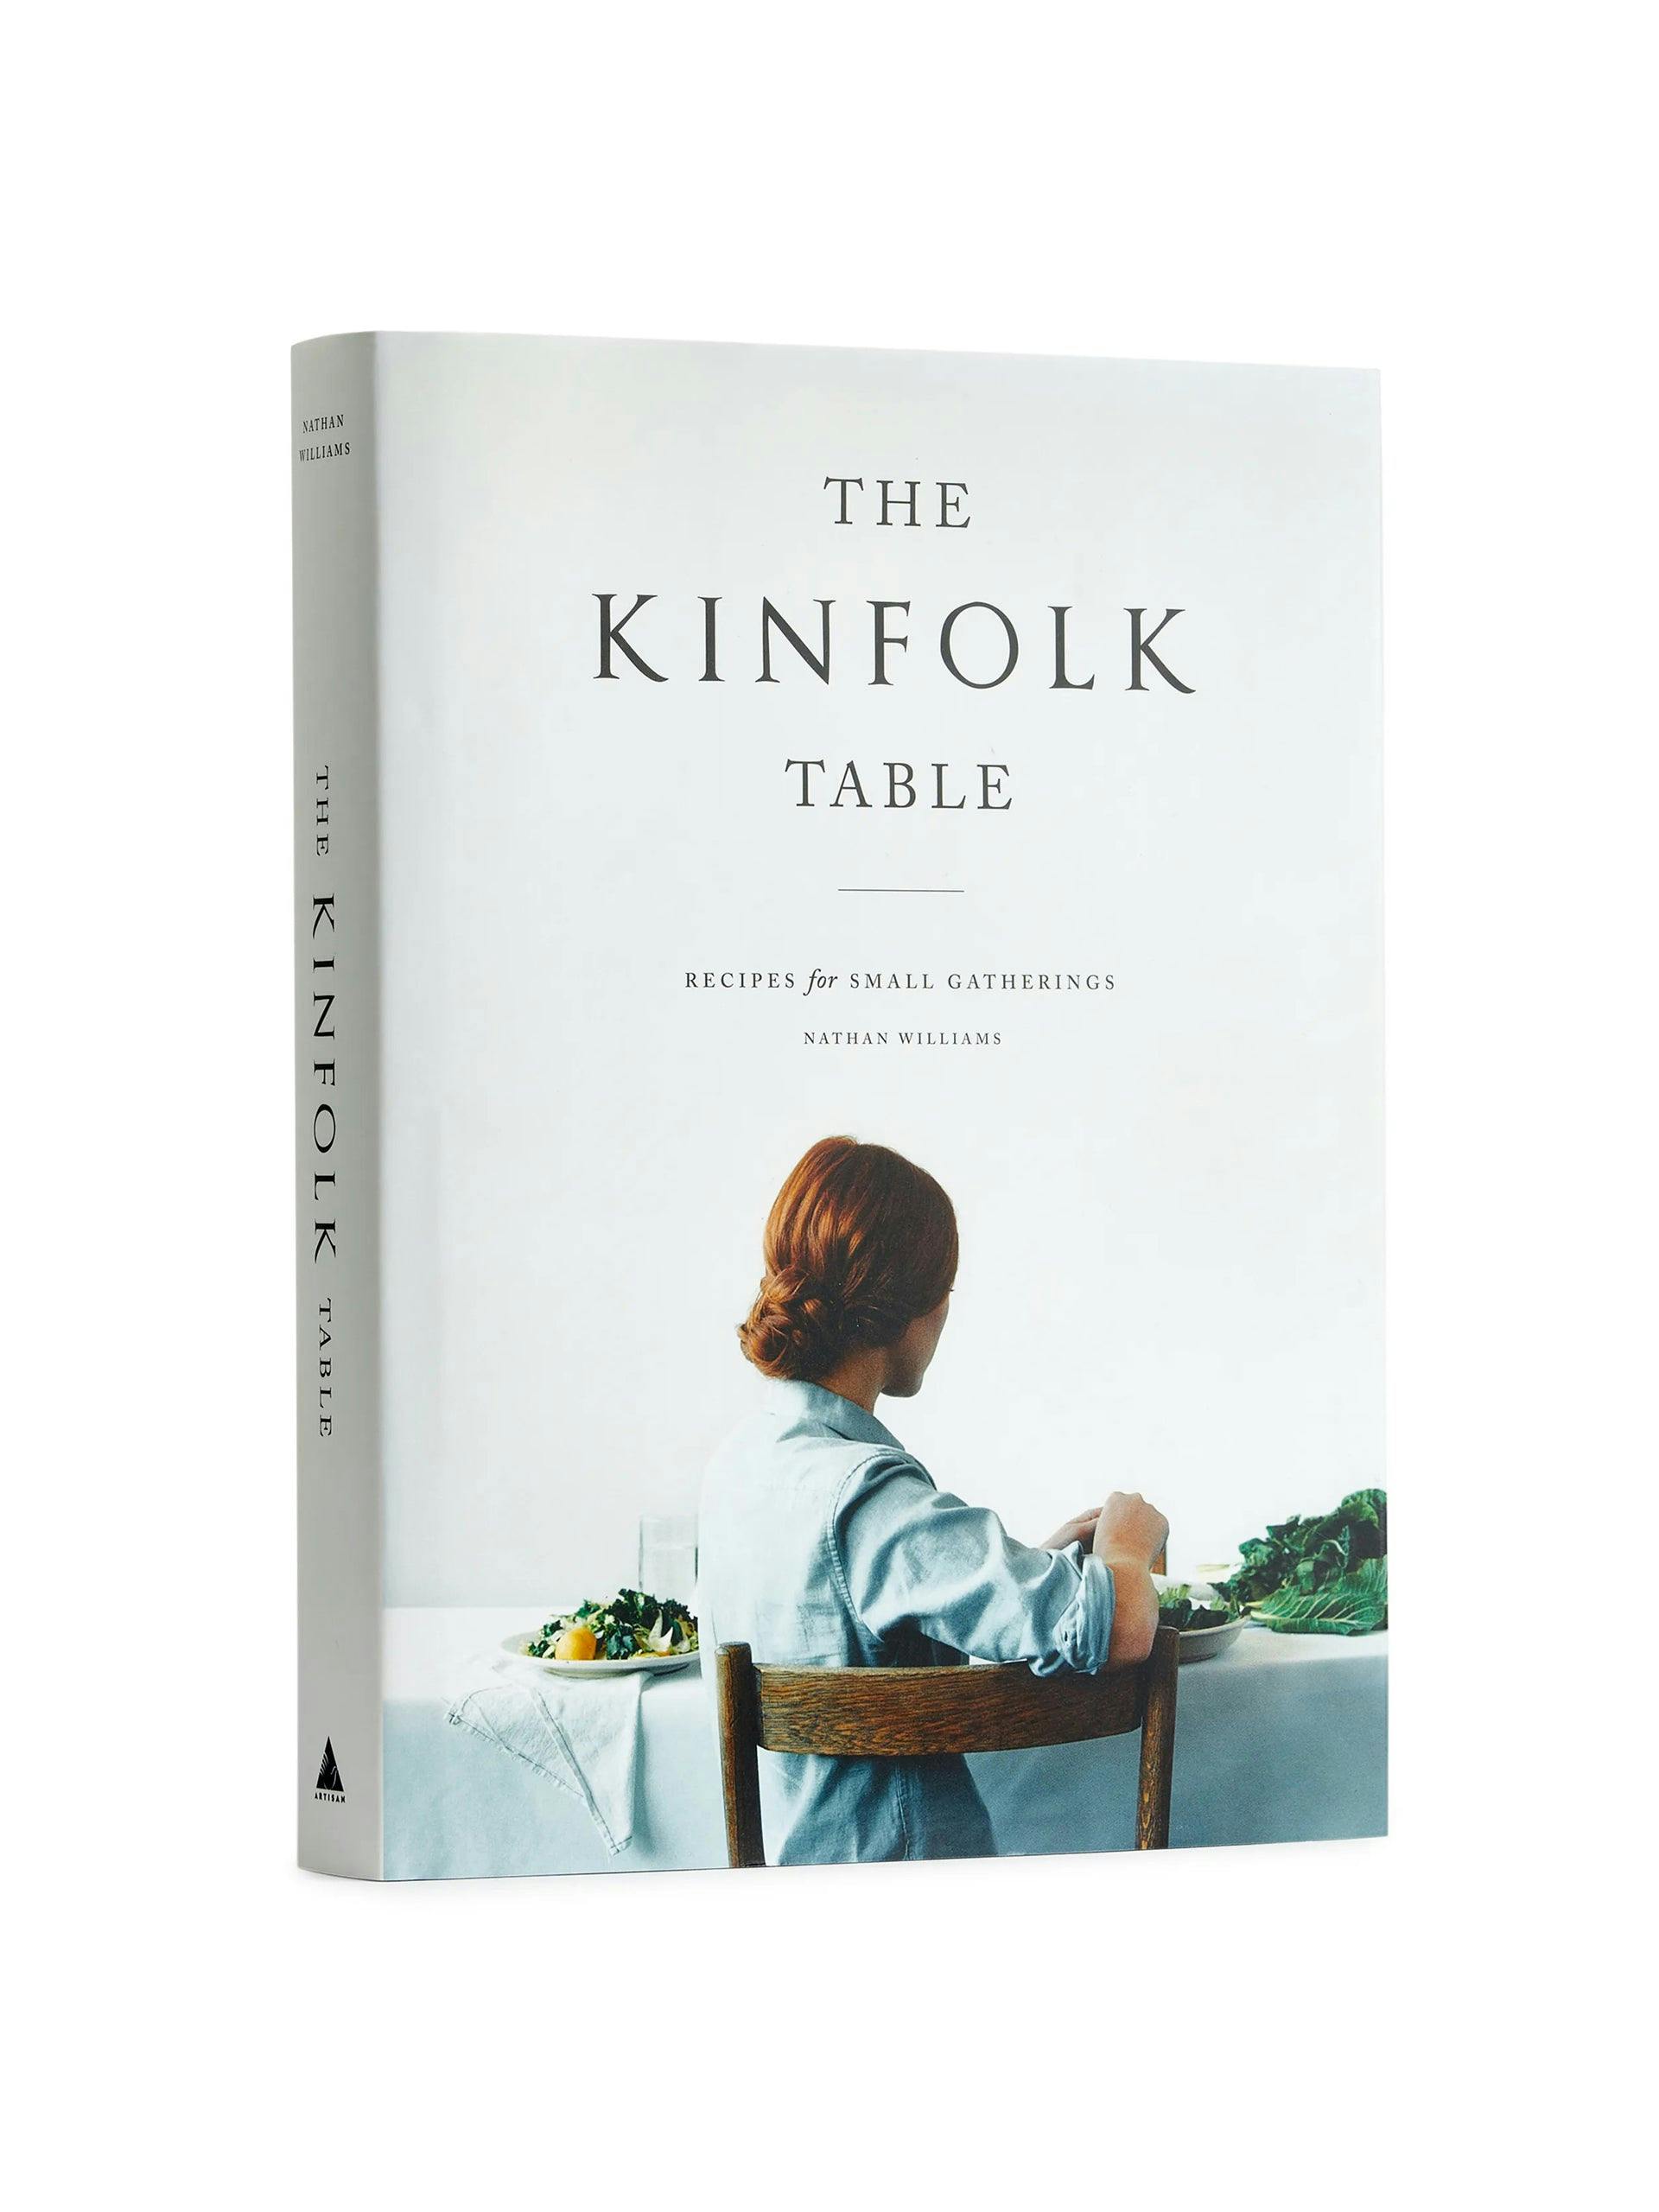 The Kinfolk Table book by Nathan Williams